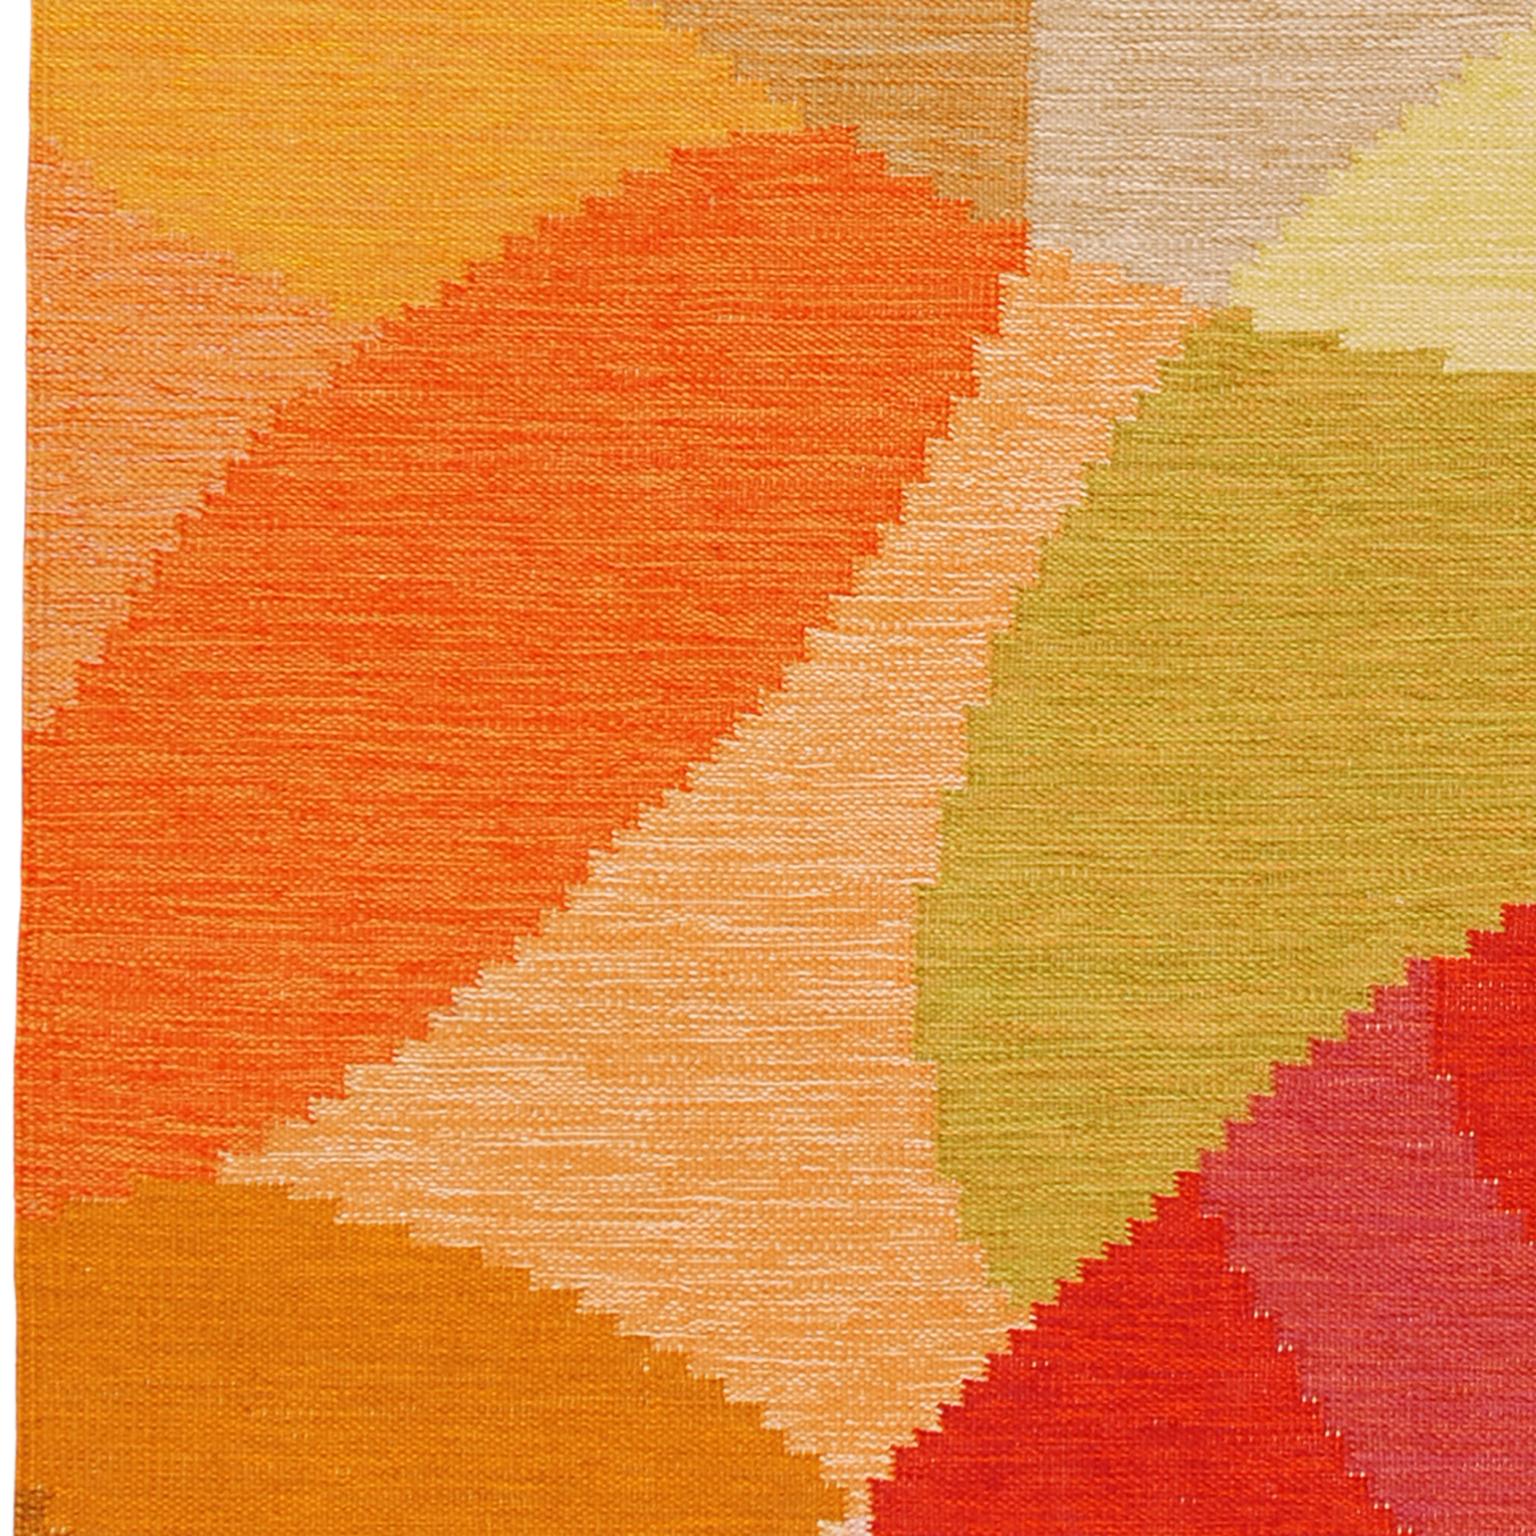 Mid-20th Century Swedish Flat-Weave Rug by Ingegerd Silow In Good Condition For Sale In New York, NY